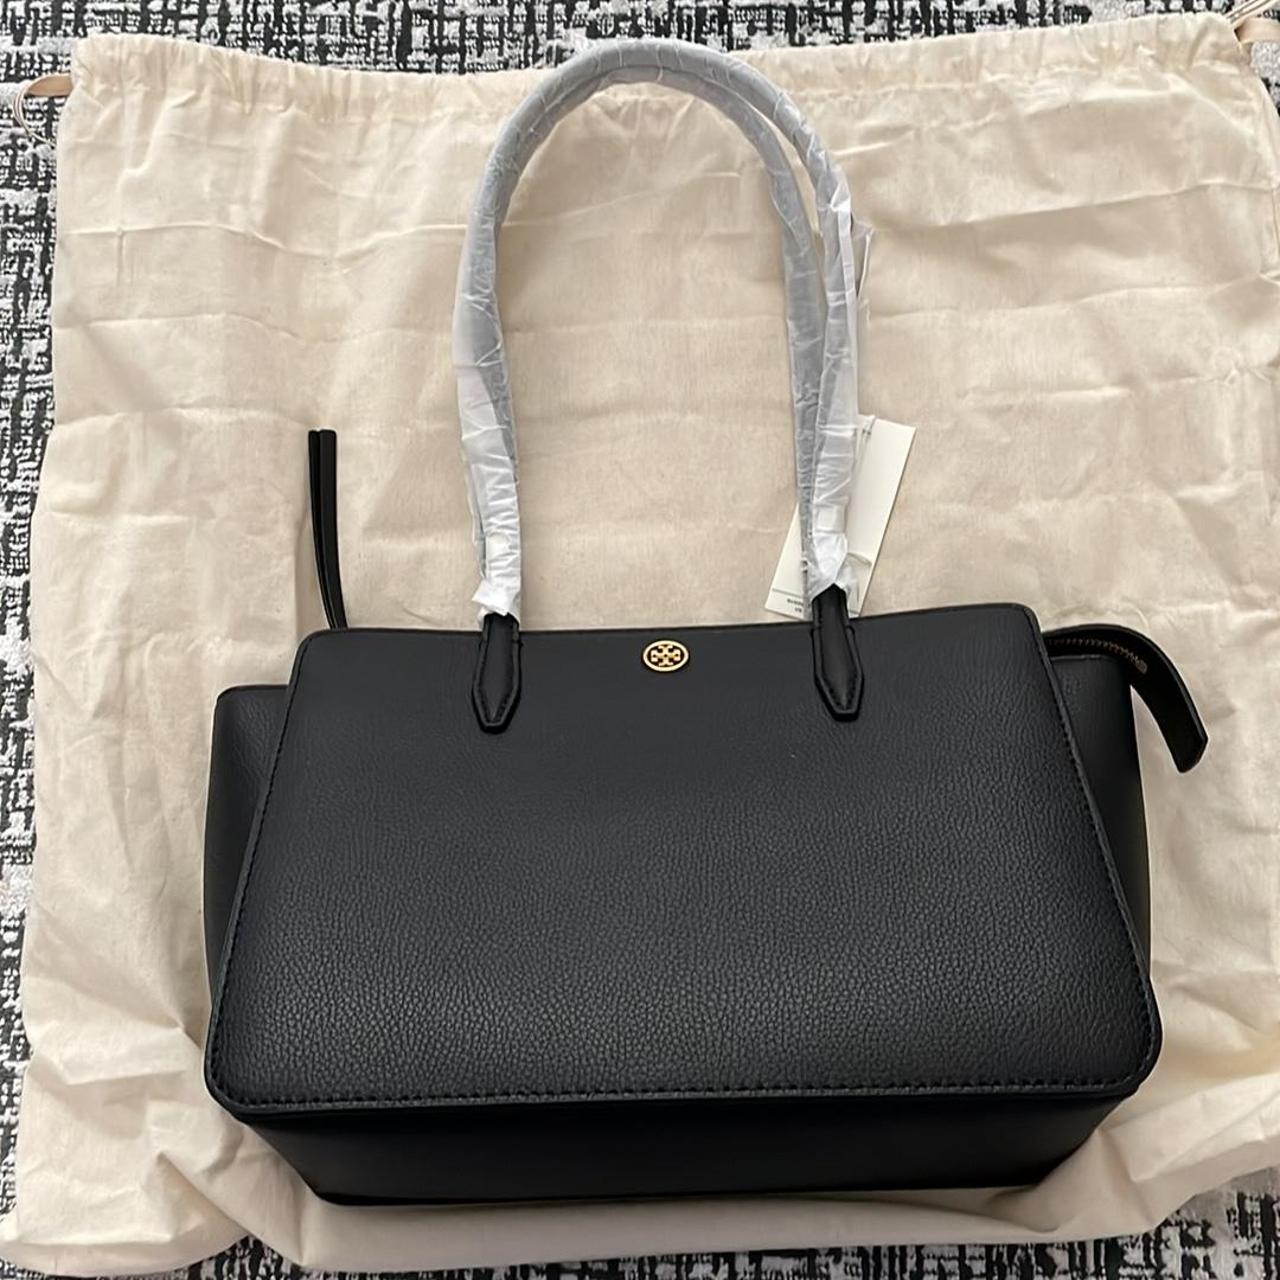 Tory Burch, Bags, Tory Burch Pebble Leather Robinson Tote